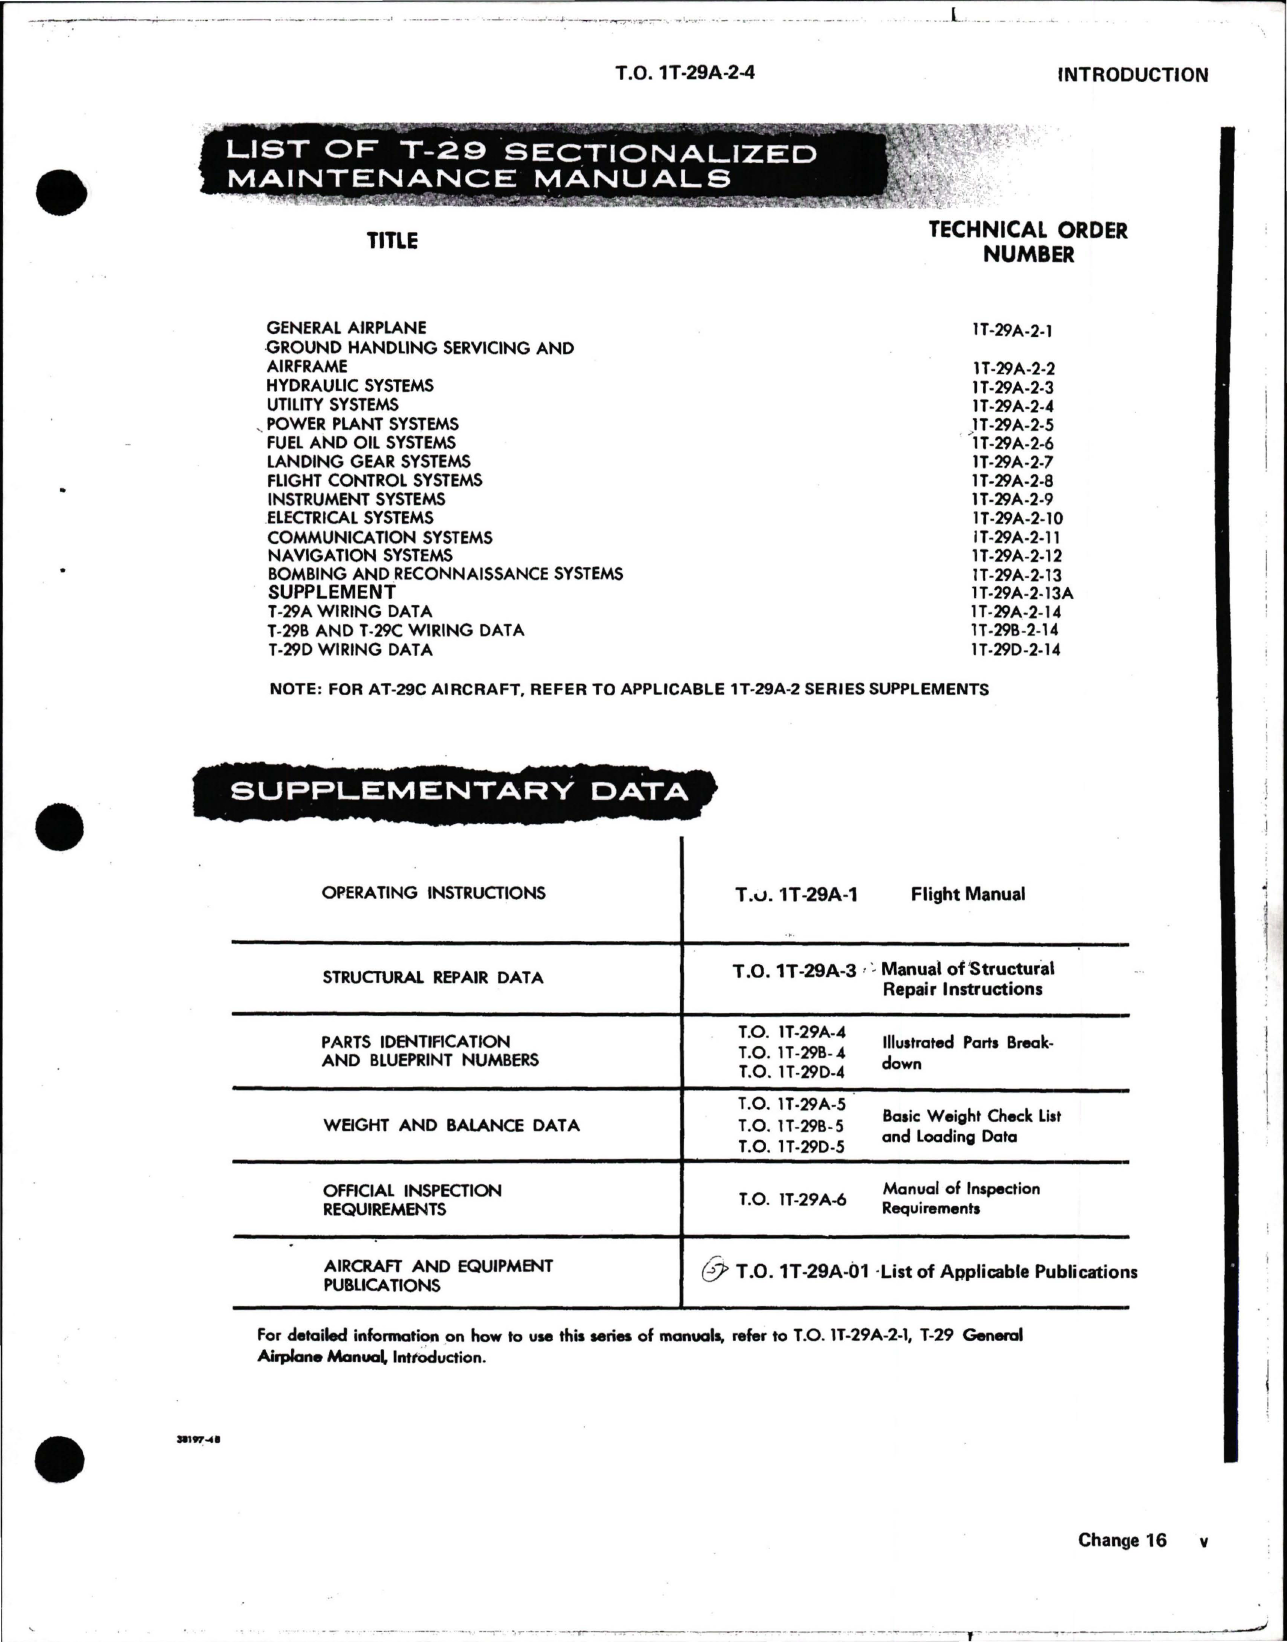 Sample page 7 from AirCorps Library document: Maintenance Manual for Utility Systems for T-29A, T-29B, T-29C, and T-29D